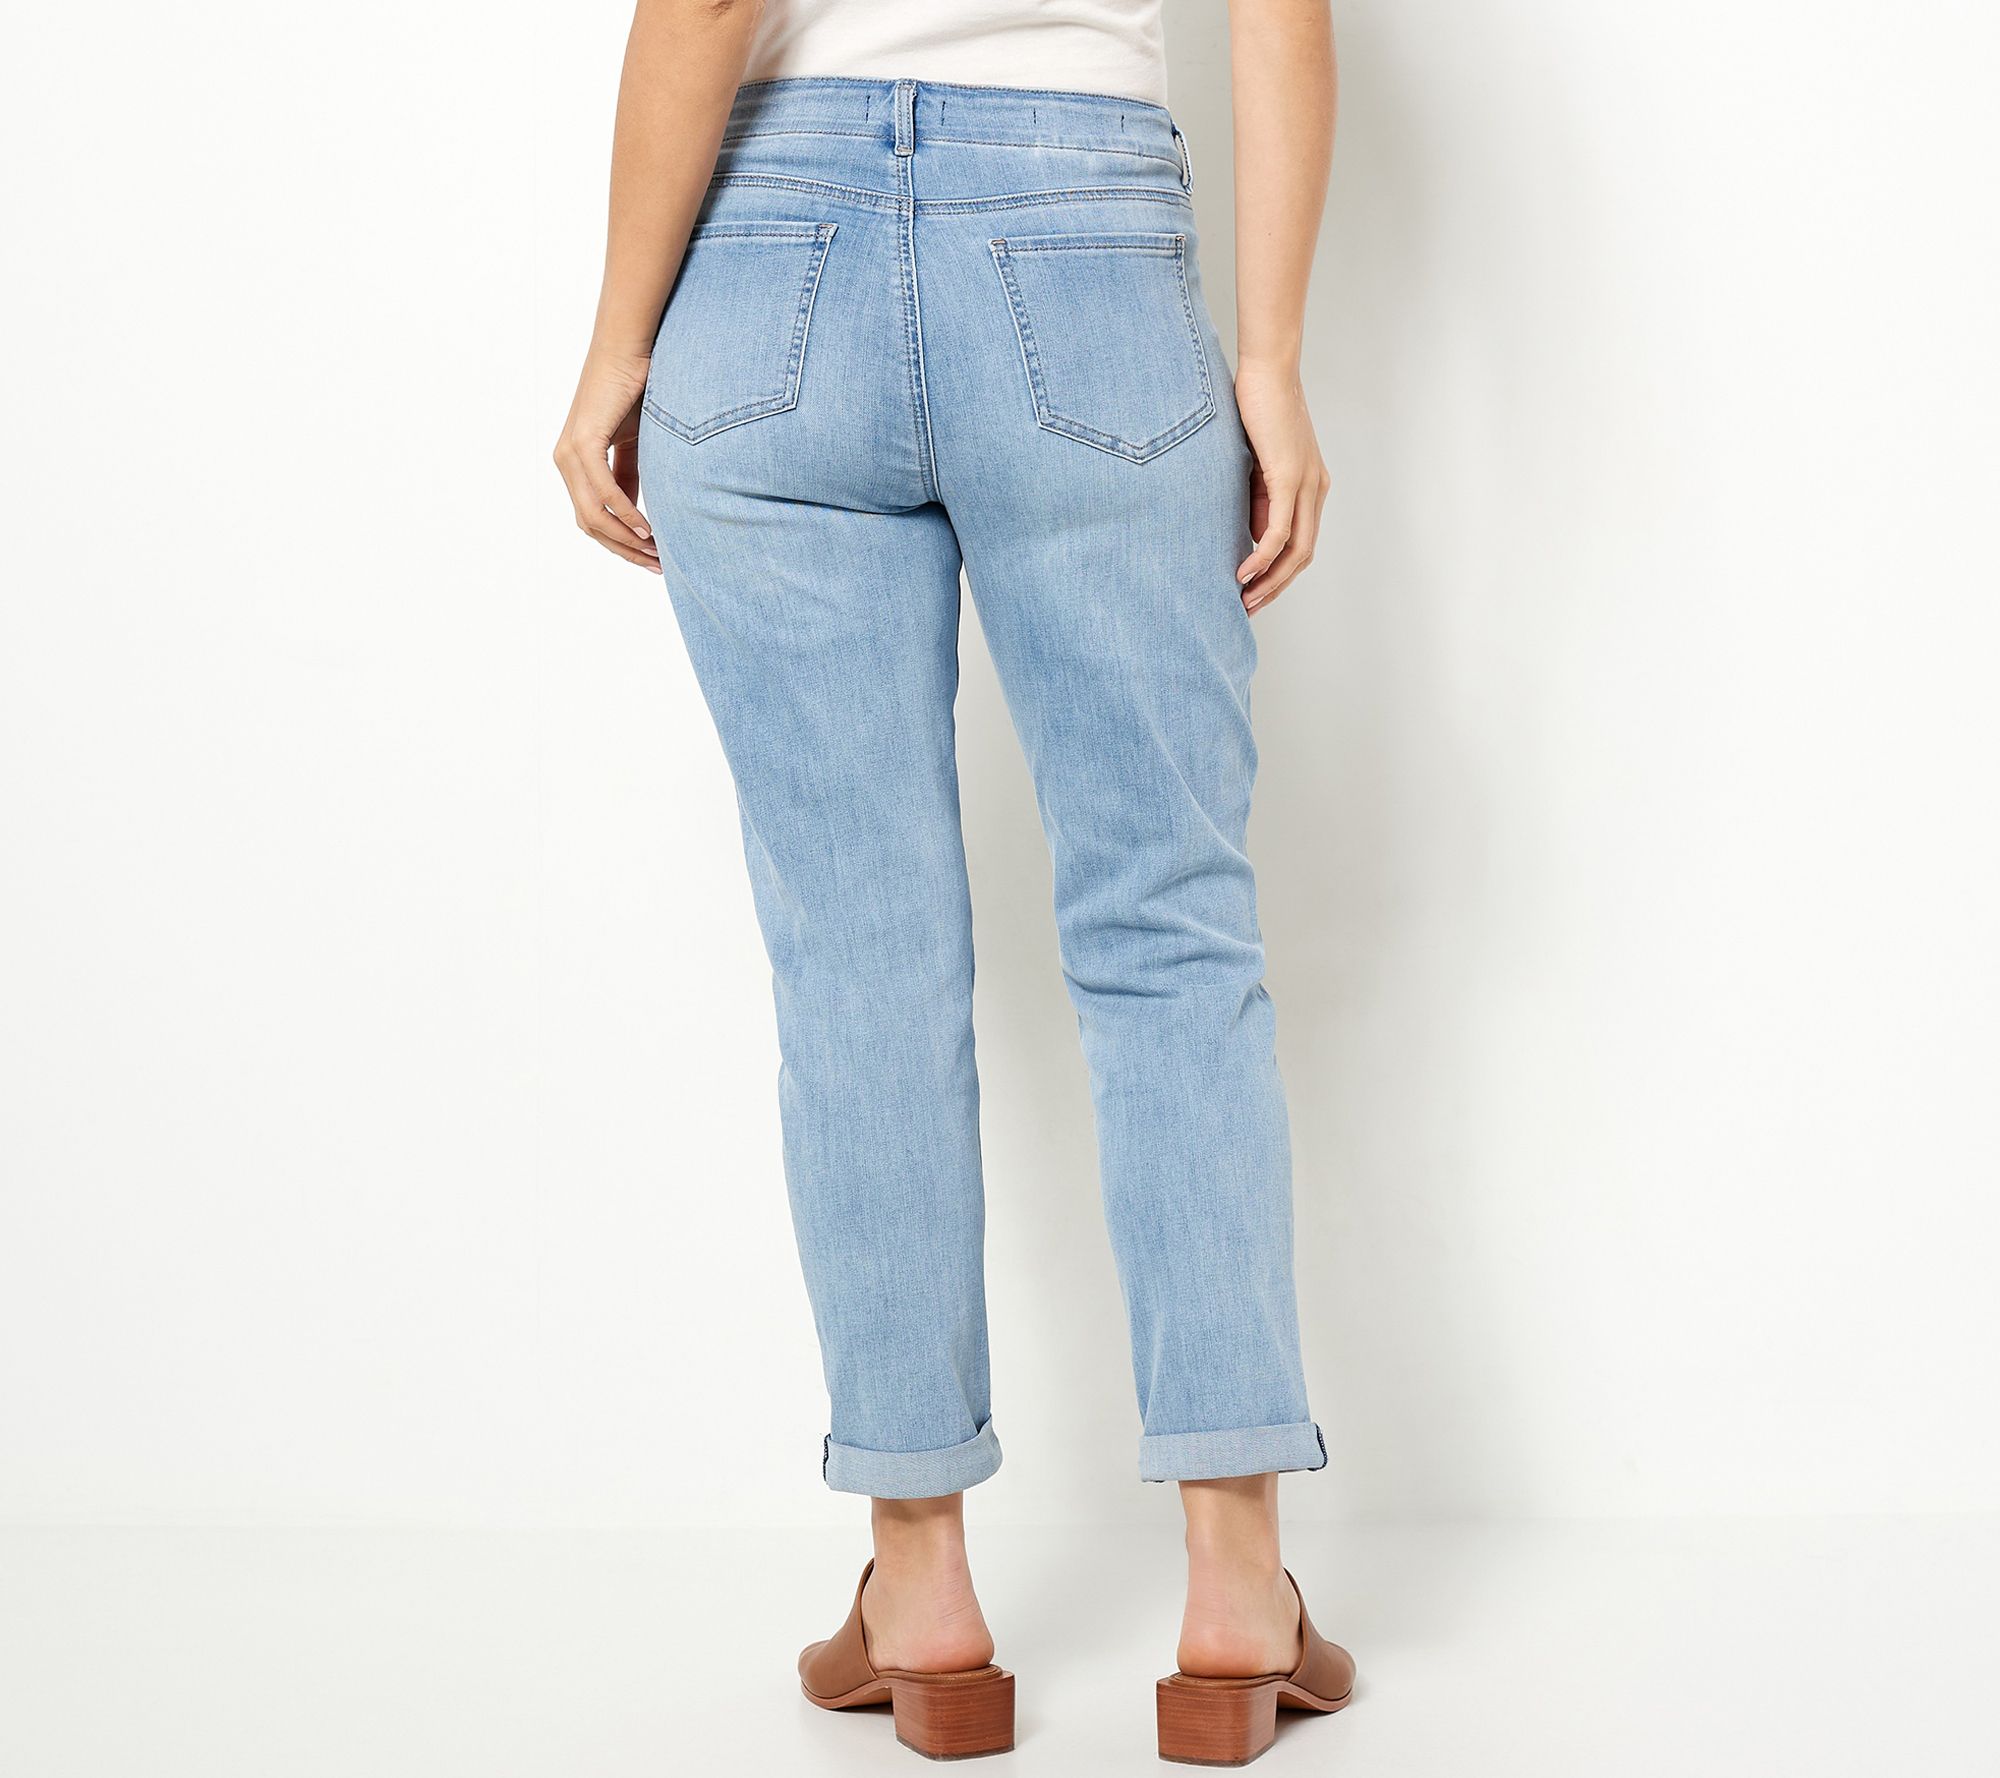 NYDJ High Rise Girlfriend Jean with Hollywood Waistband- Surfside - QVC.com